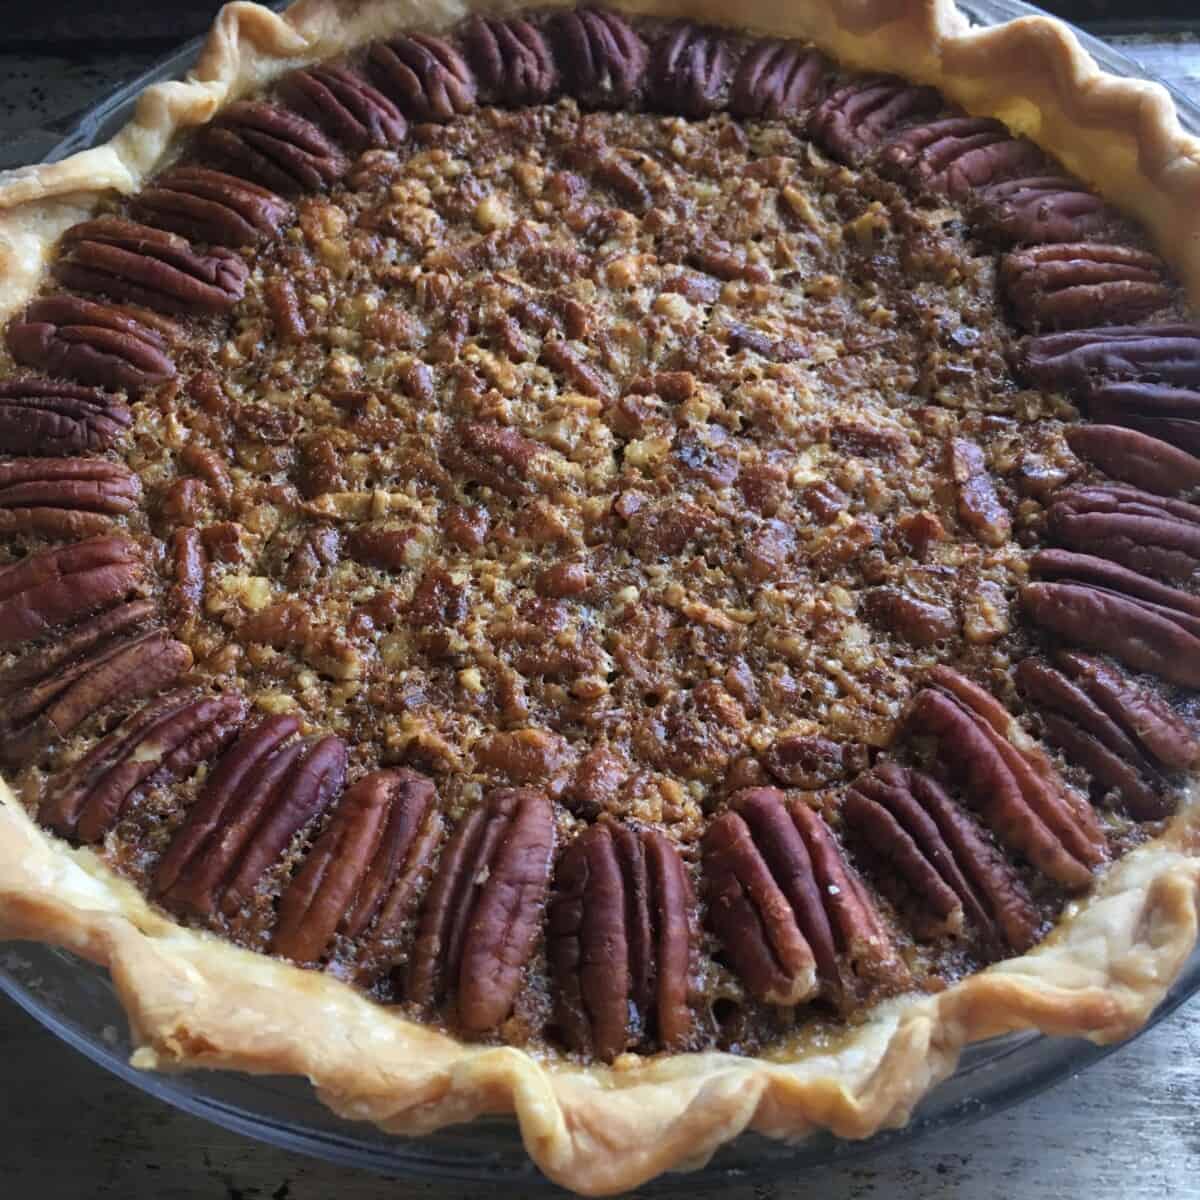 baked and rested golden brown pecan pie with a super flaky crust